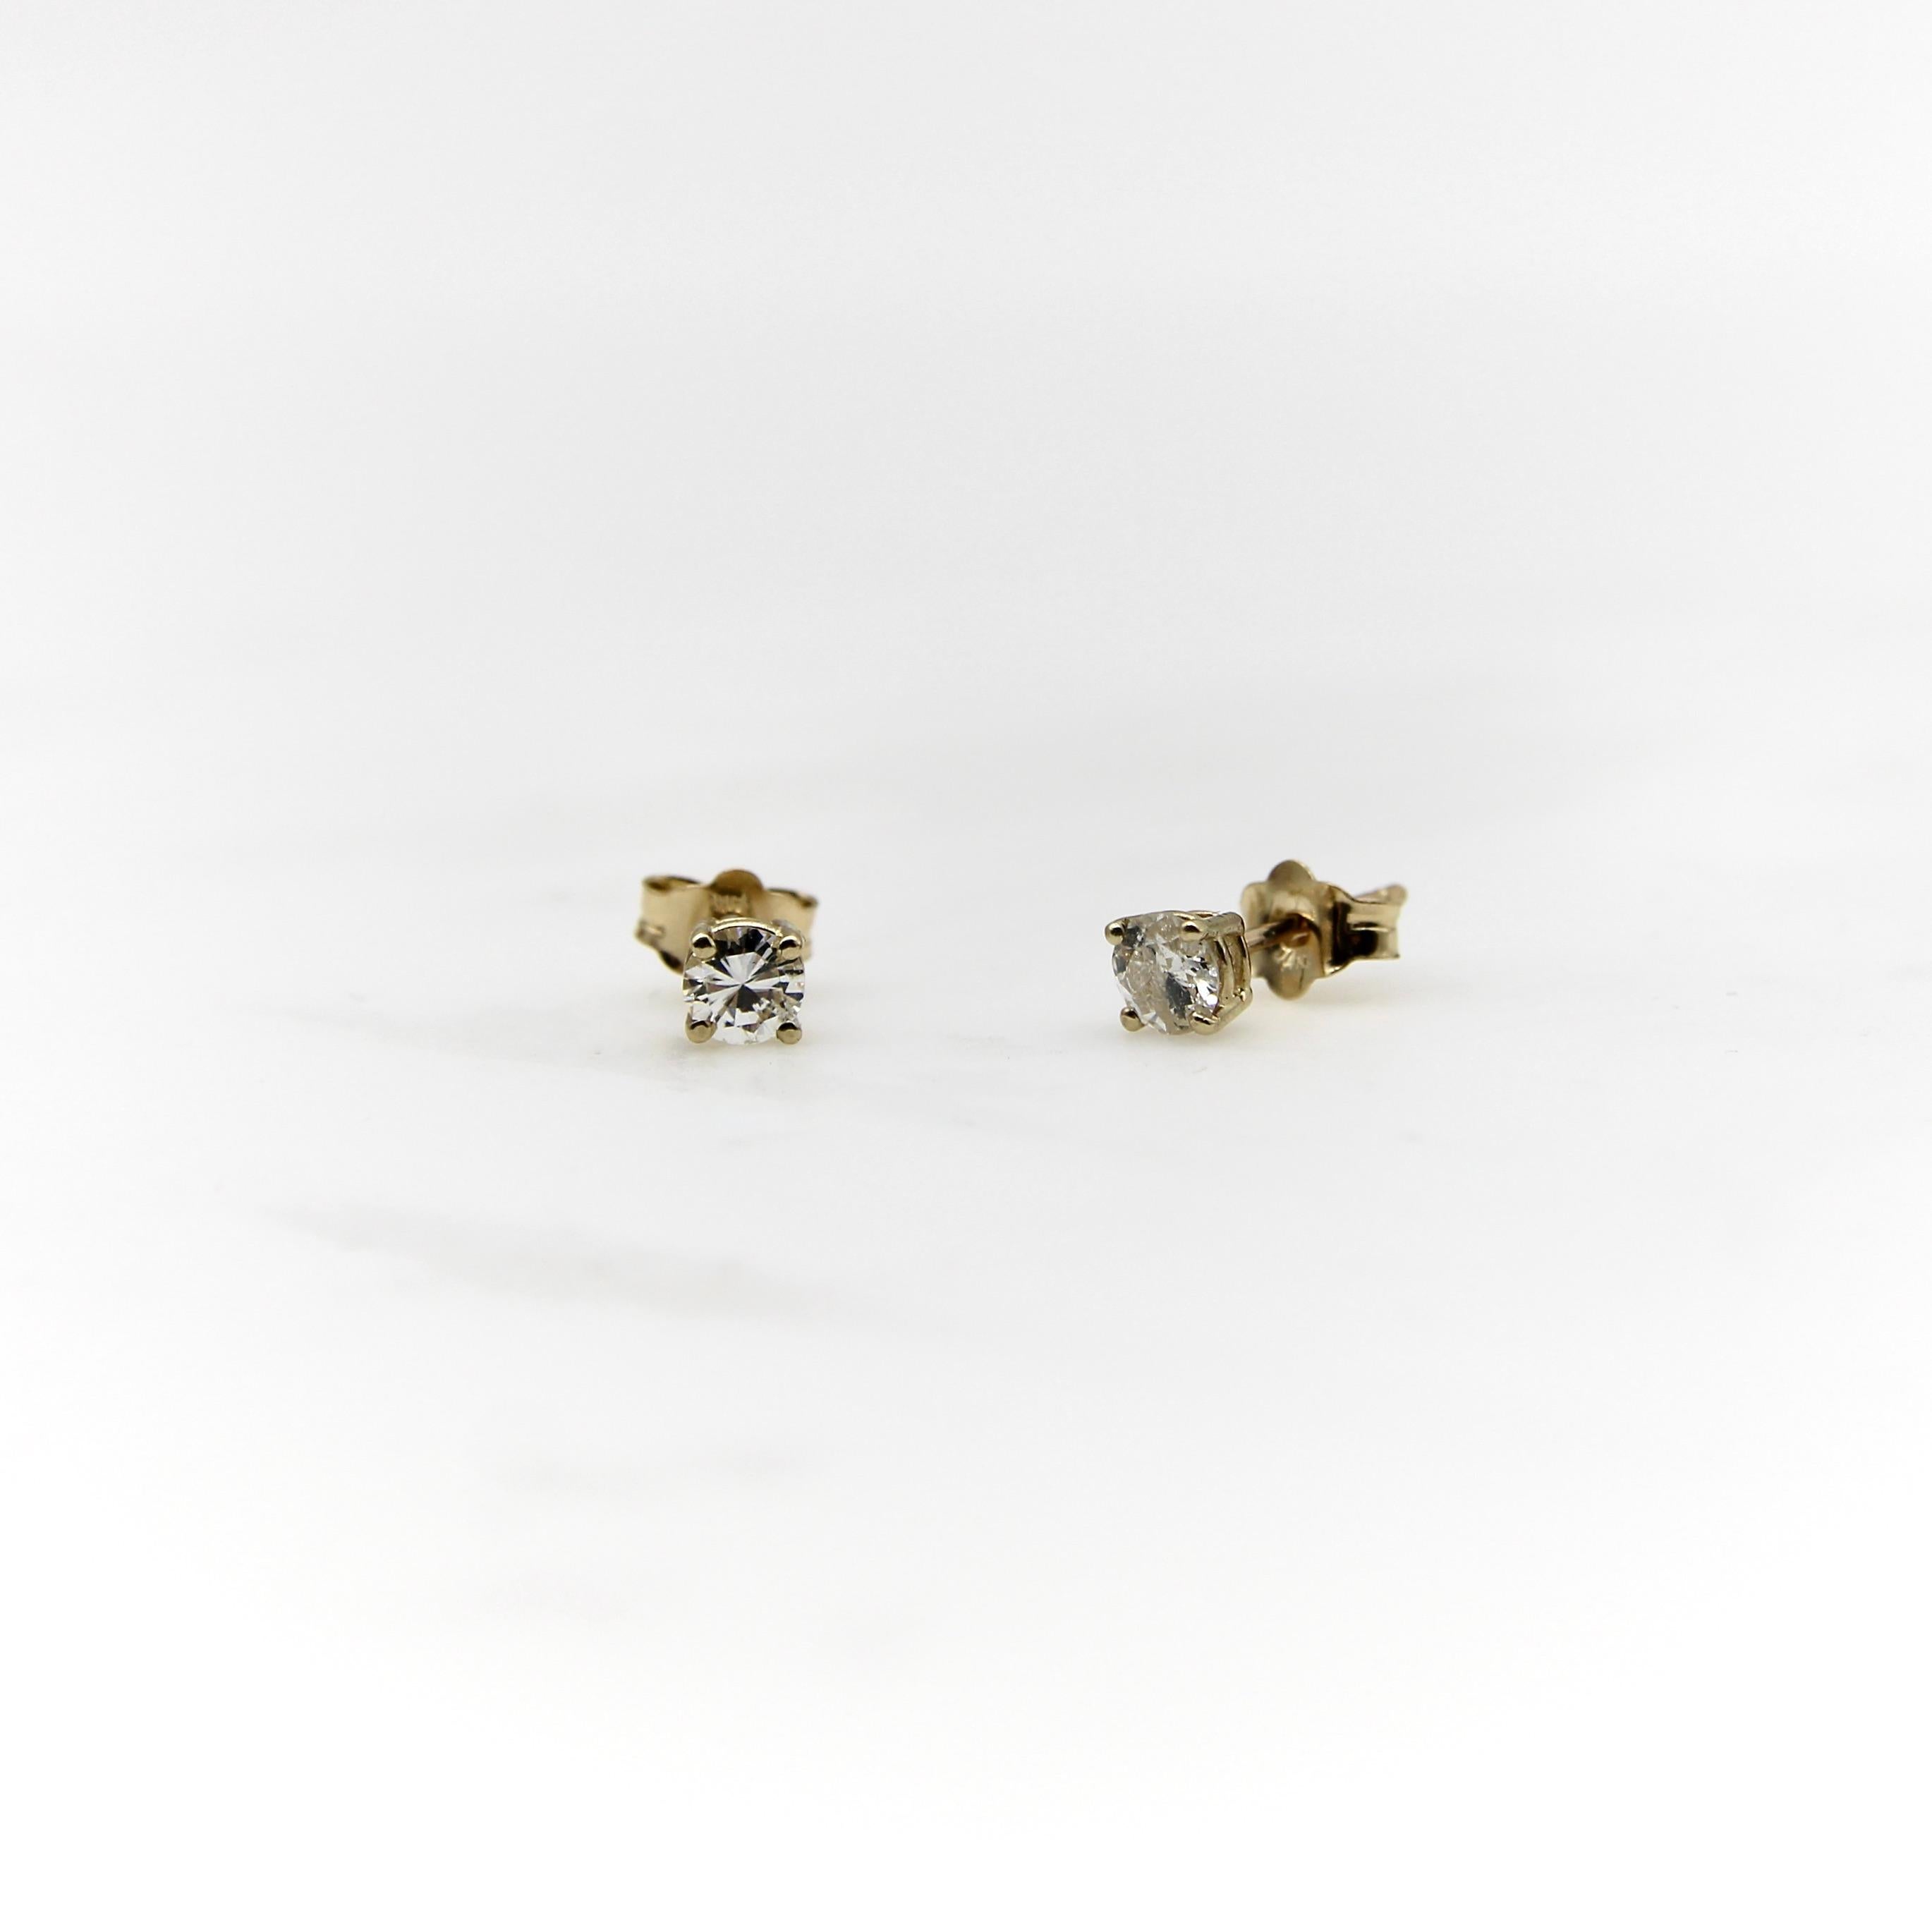 A classic, everyday pair of earrings, these 14k gold diamond studs are a staple in any jewelry collection. At 3.75 mm, these earrings are the perfect size to wear as stand alone studs or in a row of piercings. Set in a 14k gold prong setting, the